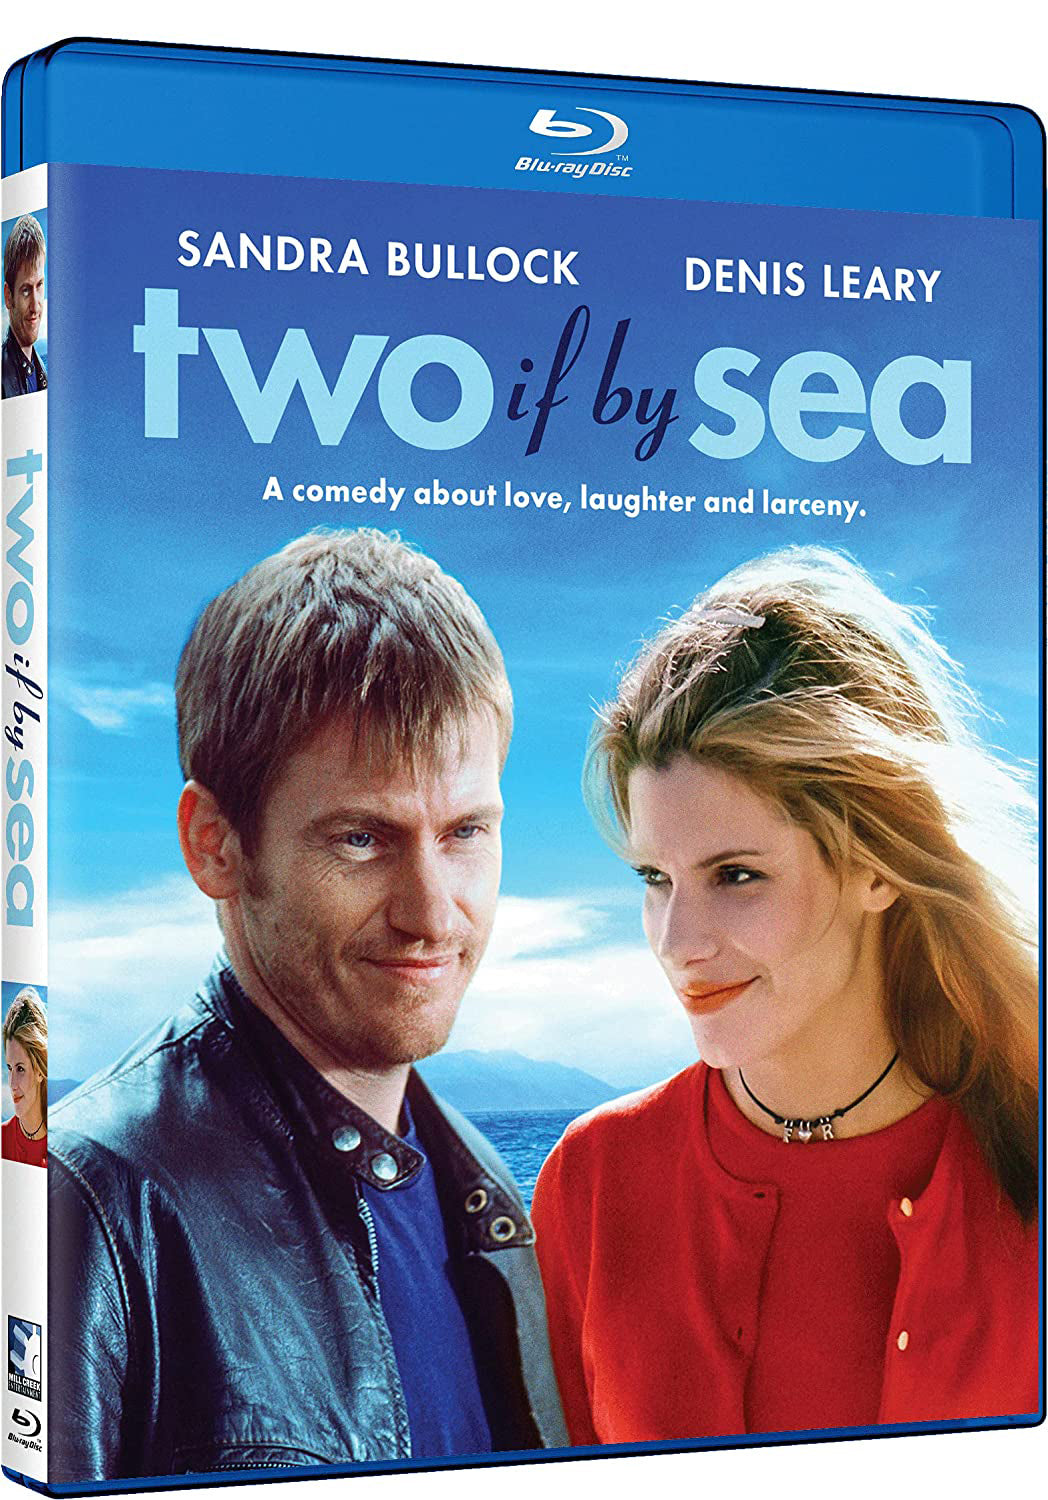 Two If by Sea [Blu-ray] cover art